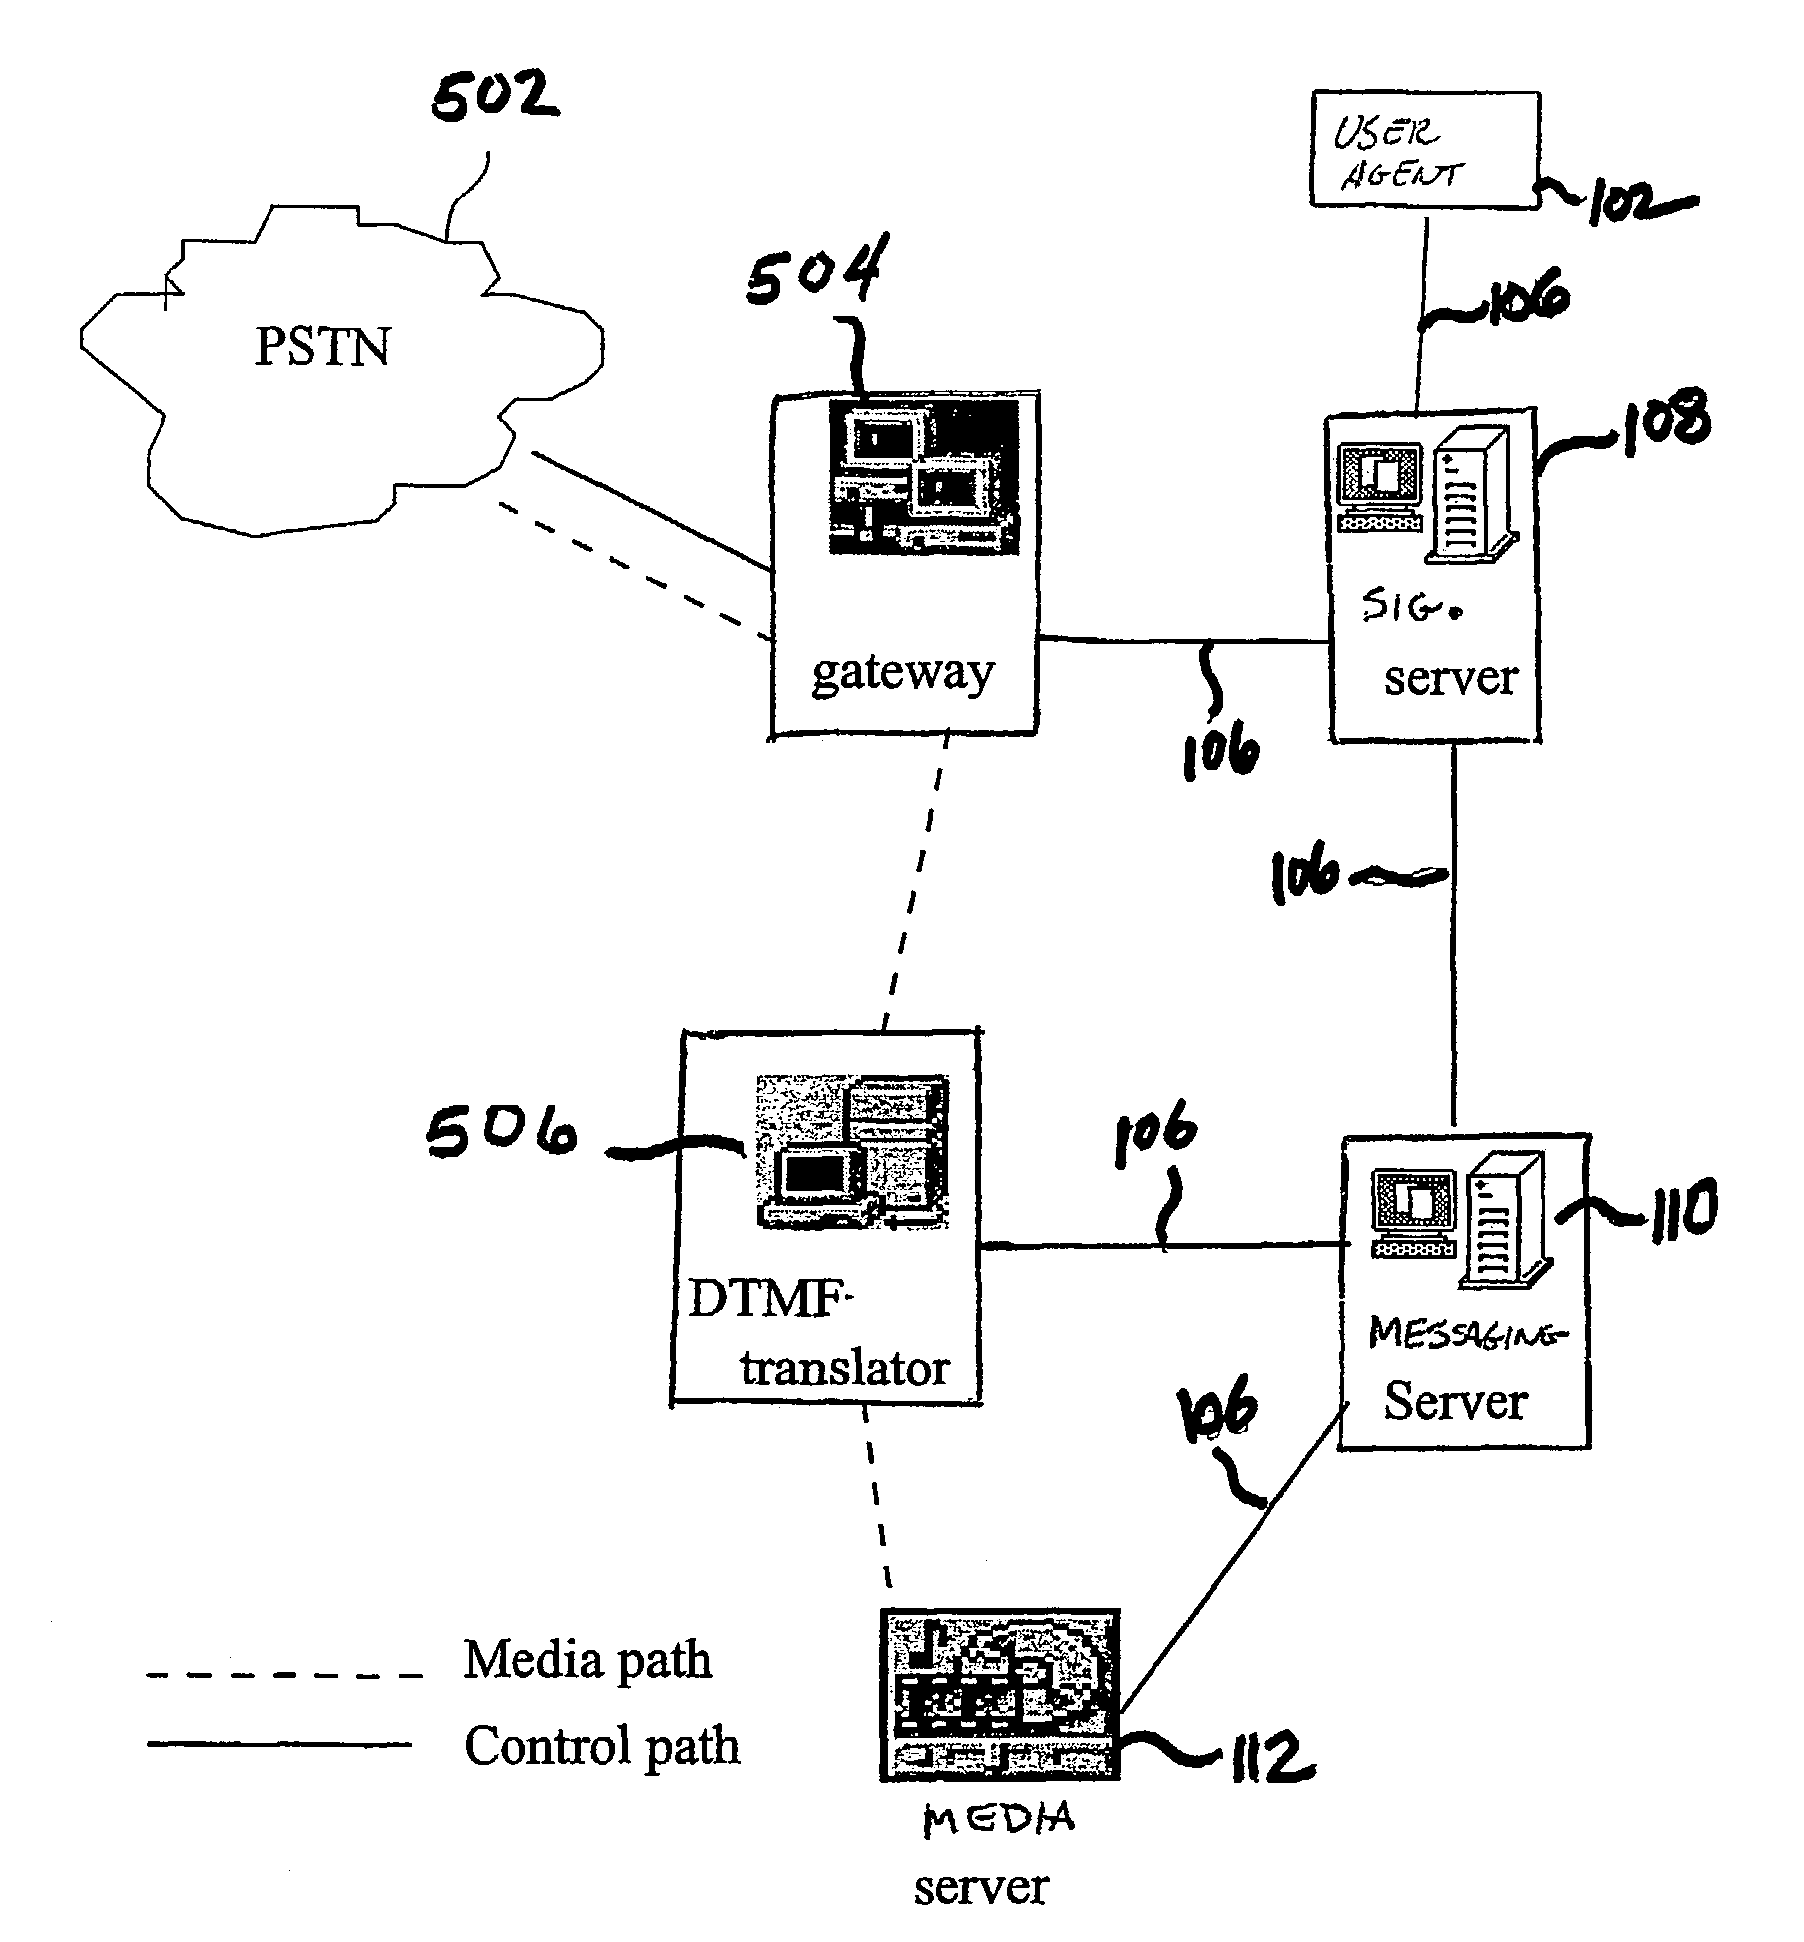 System and method for unified messaging in inter/intranet telephony